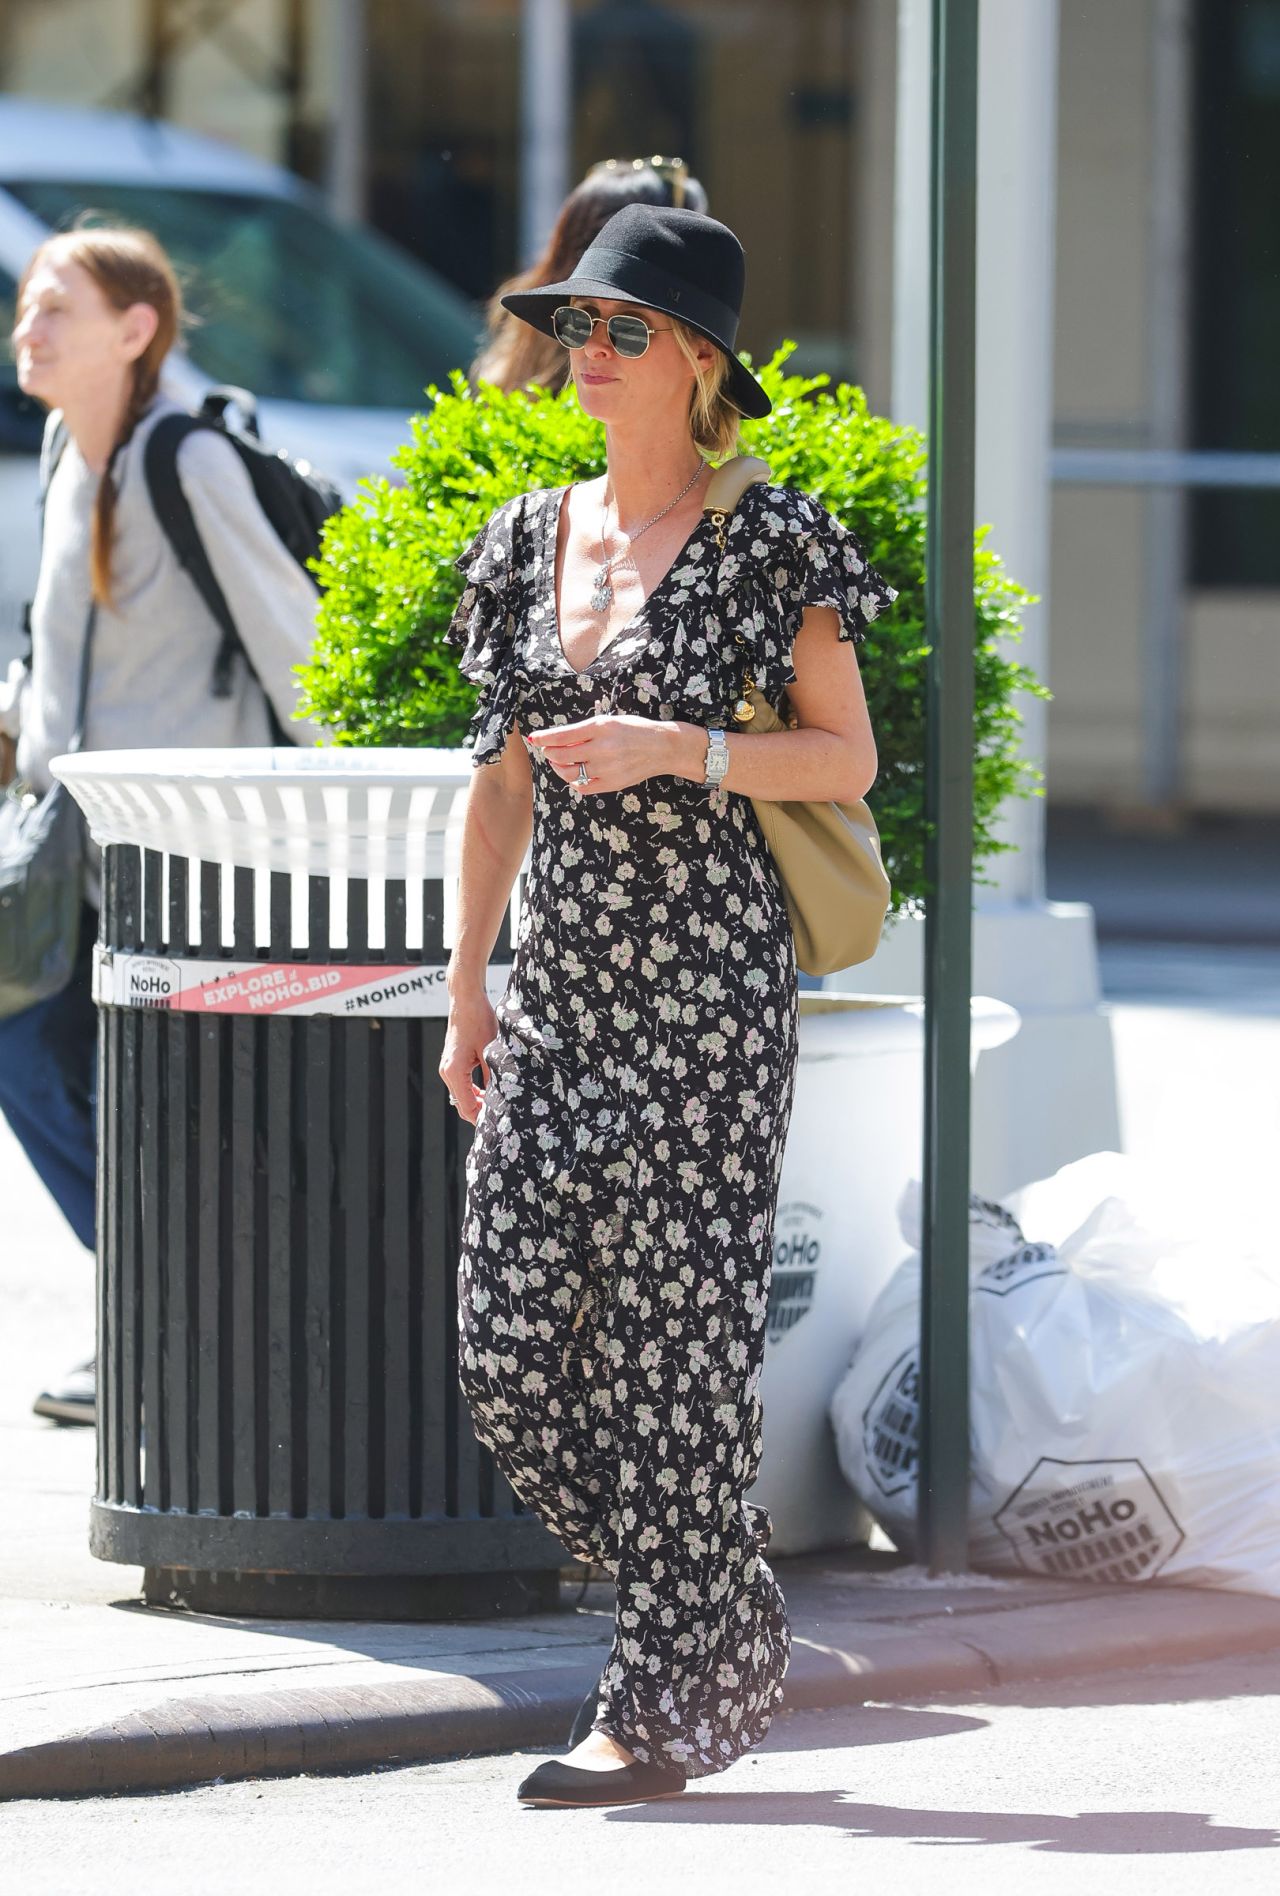 NICKY HILTON WAS SPOTTED OUT ENJOYING A WALK IN THE BIG APPLE5